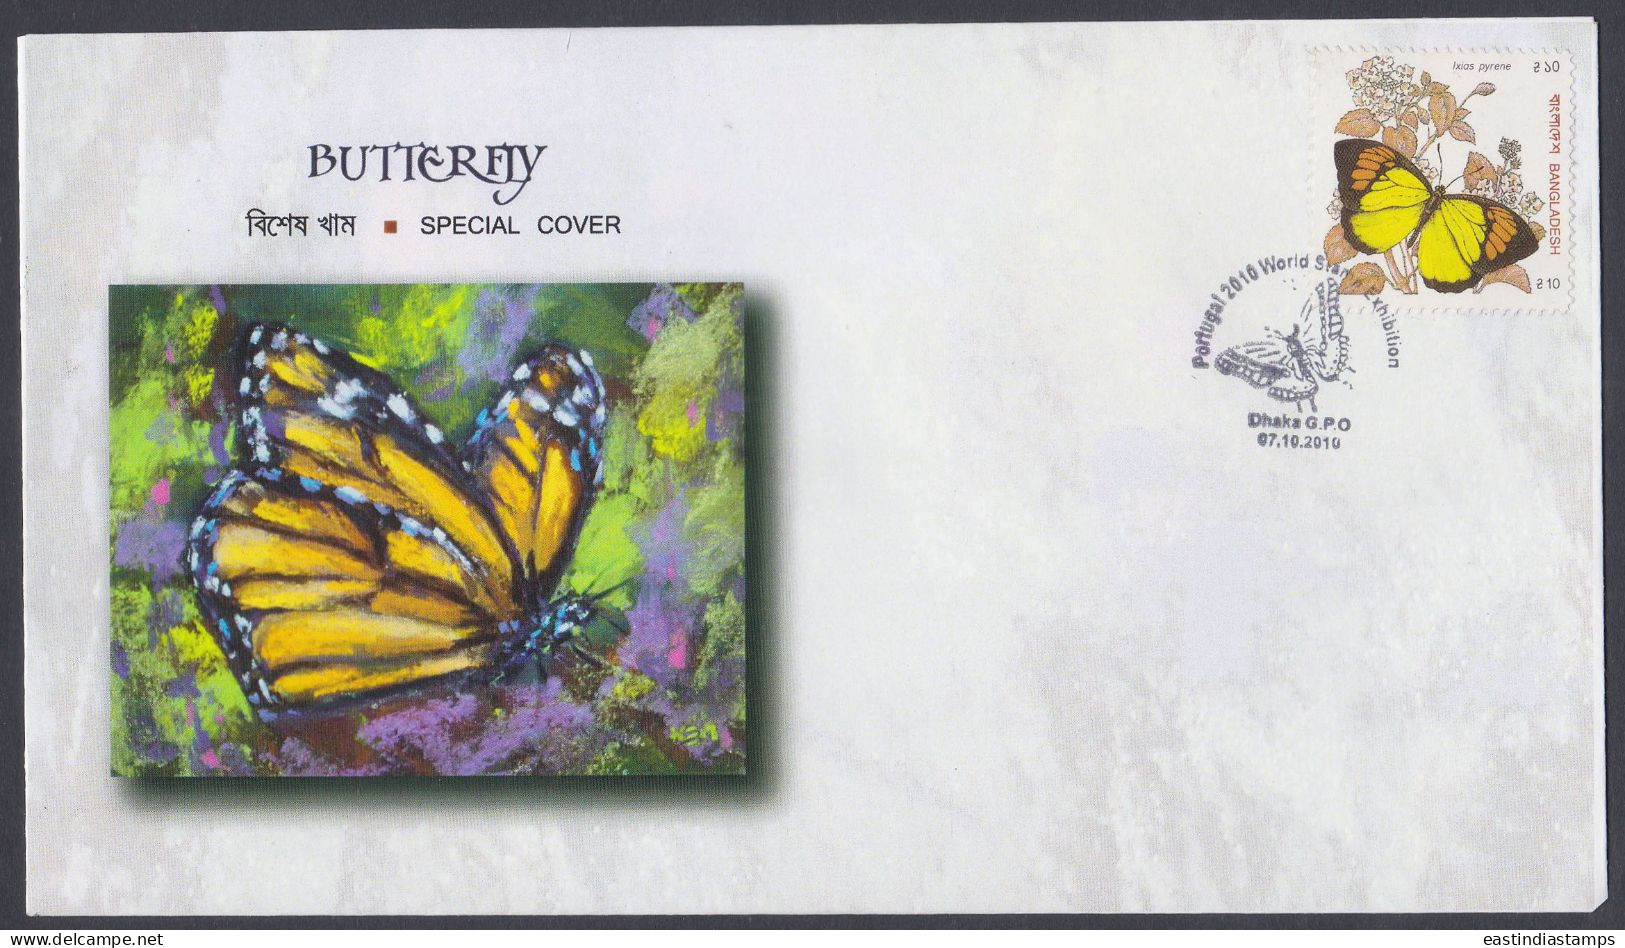 Bangladesh 2010 Private Cover Butterfly, Butterflies, Pictorial Postmark - Bangladesh